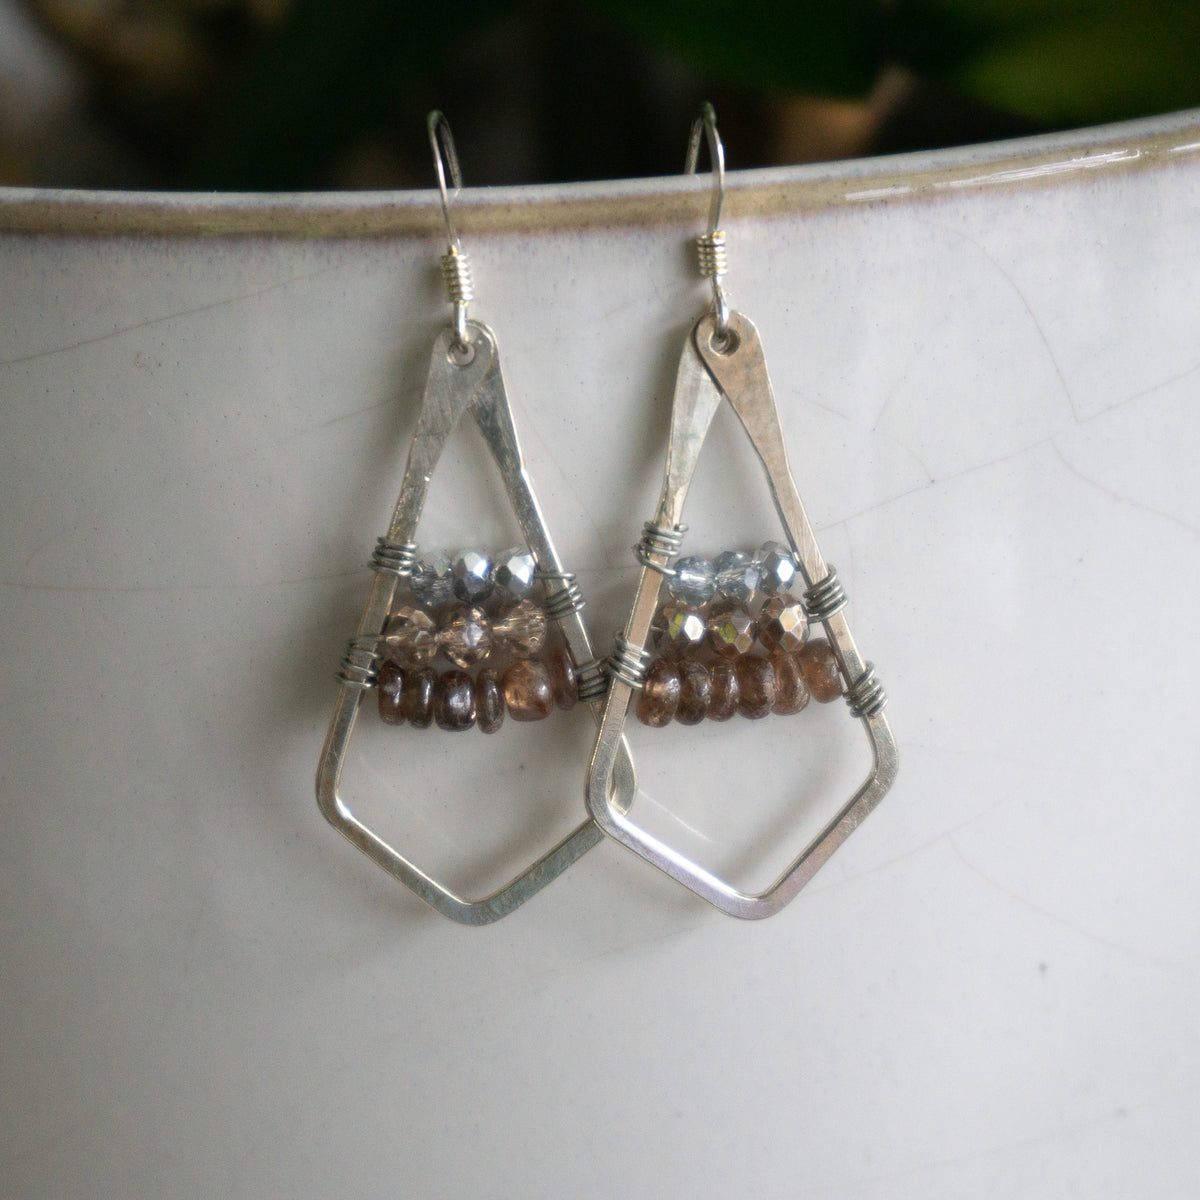 Ombre Earrings - Small Neutral